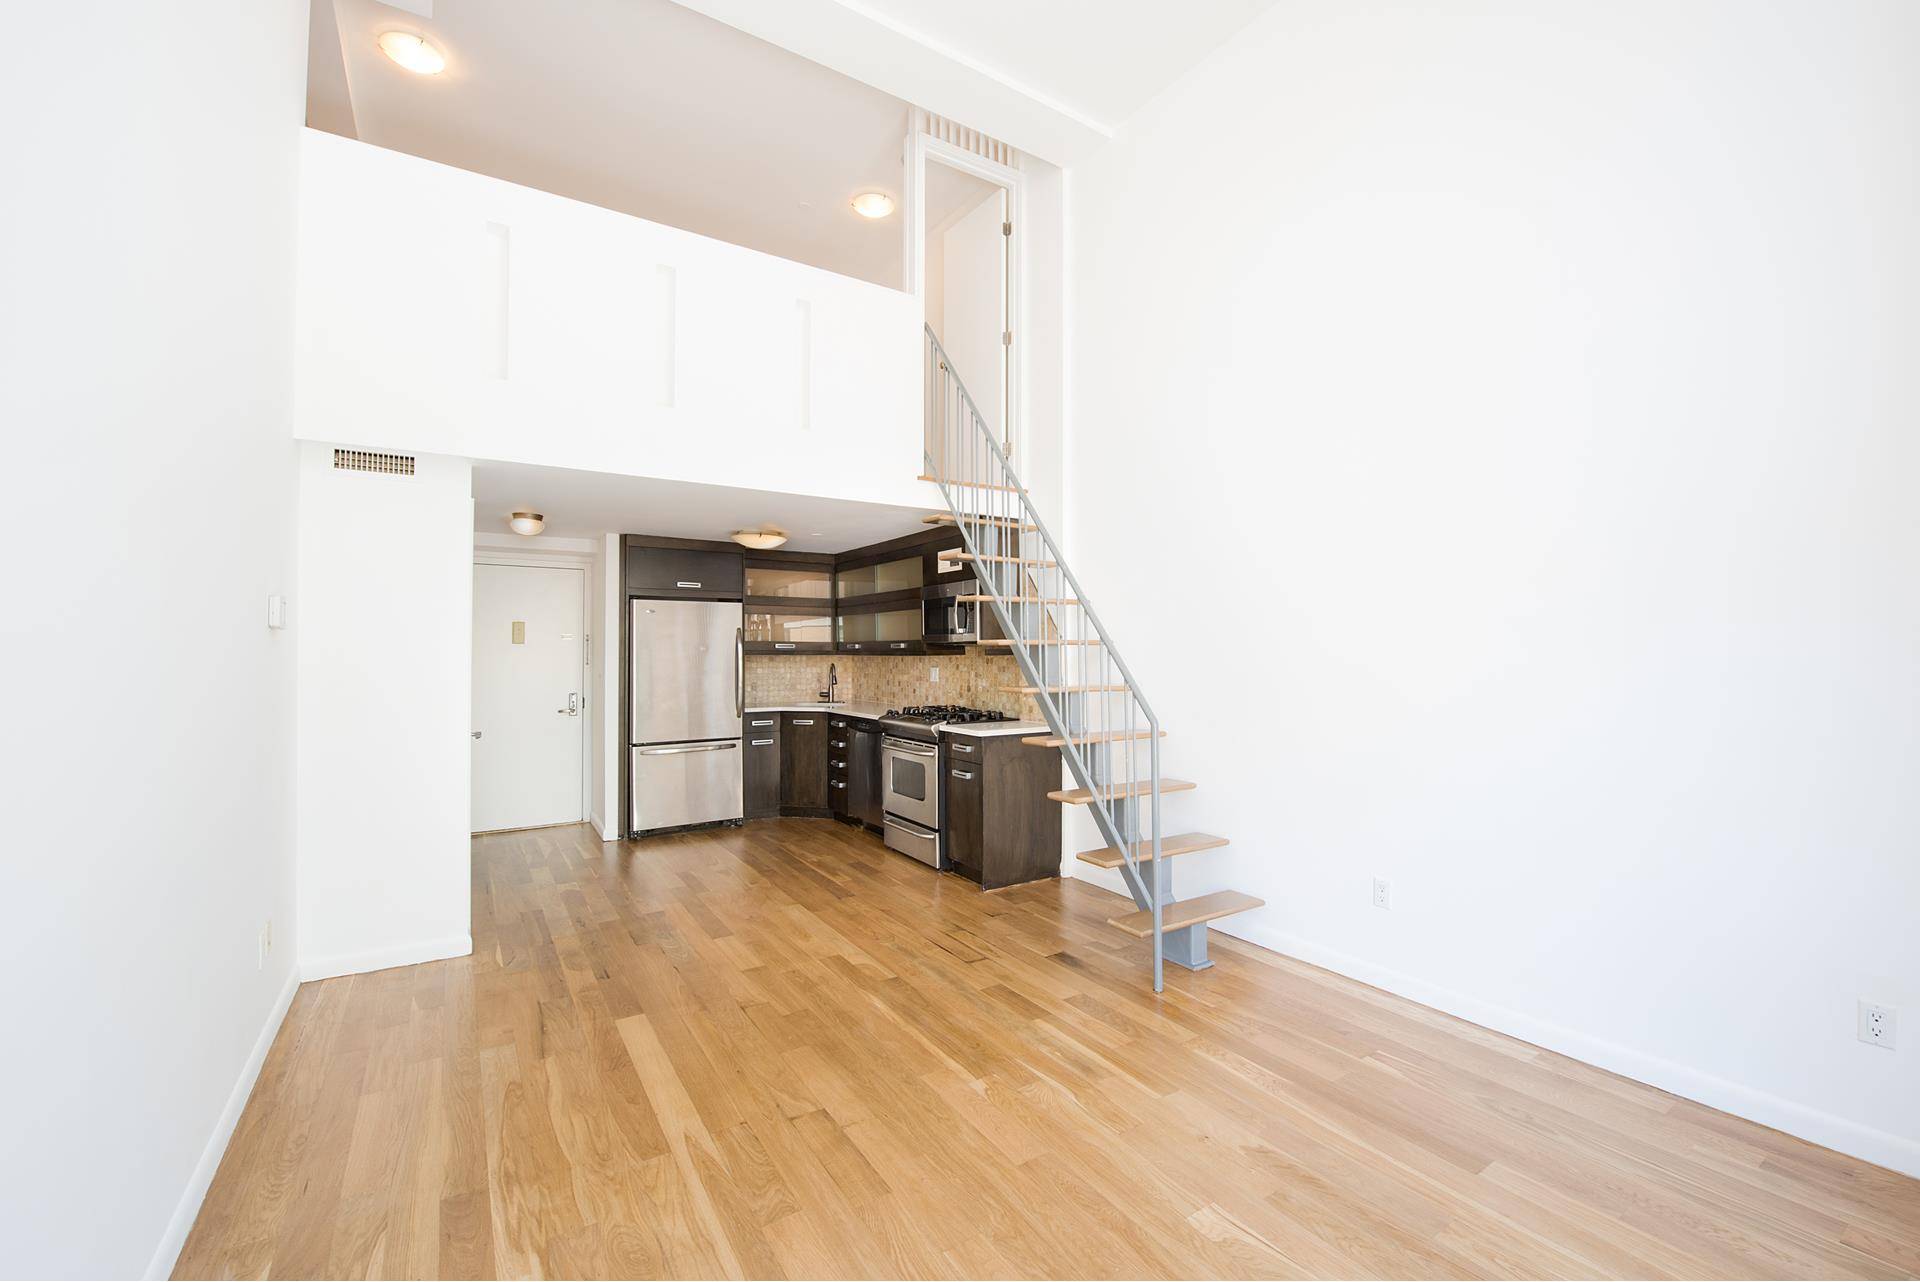 Massive convertible three bedroom, one and a half bath Condo residence close to the Montrose L train and less than 15 minutes away from Union Square.